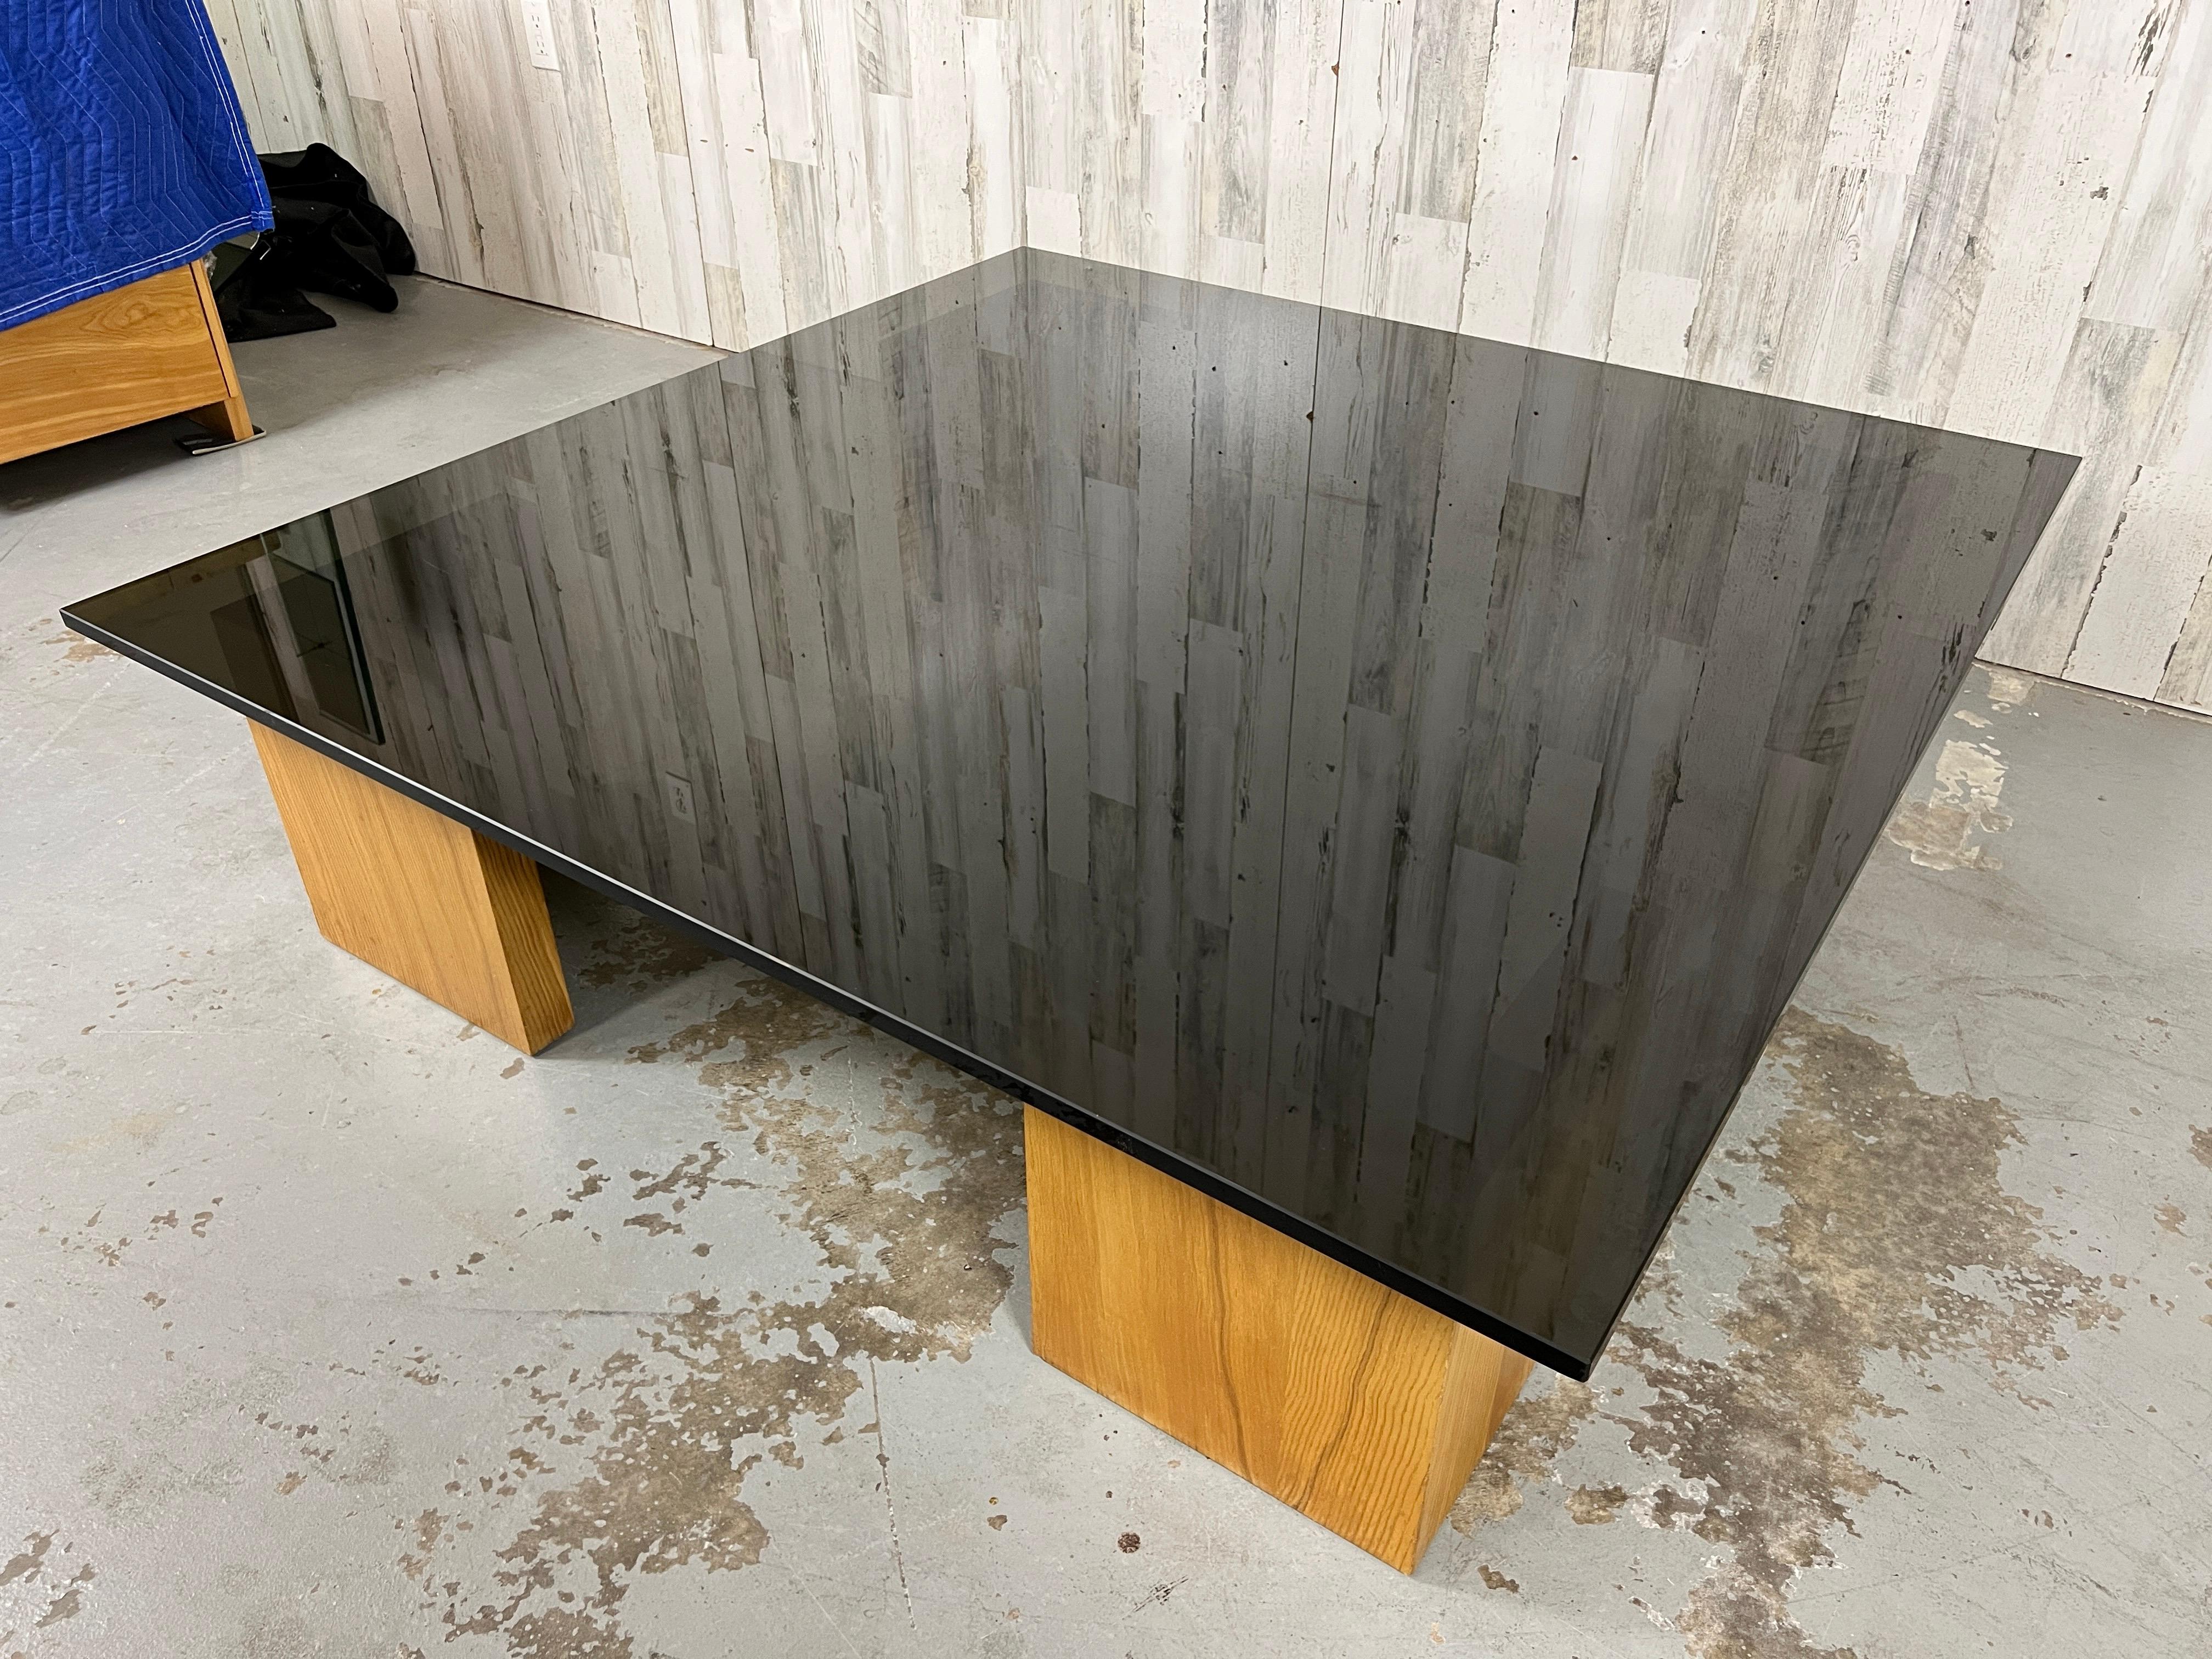 Smoked Glass and Wood Coffee Table im Zustand „Gut“ im Angebot in Denton, TX